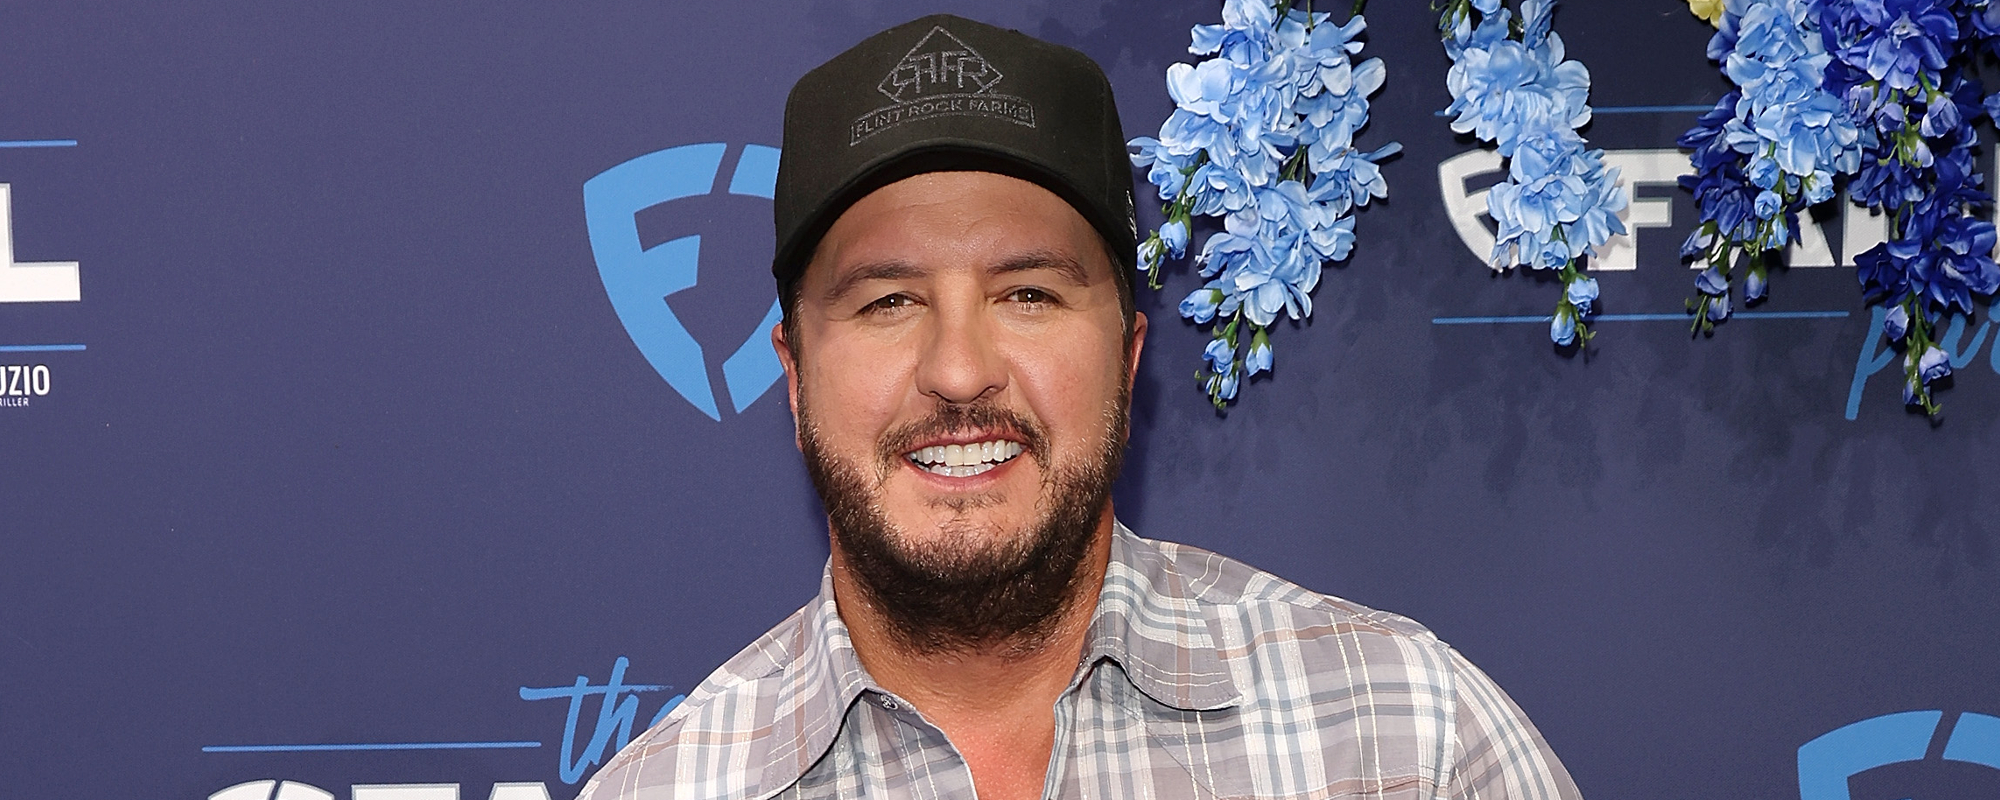 Luke Bryan Gives Update on Finding Katy Perry’s Replacement for ‘American Idol’